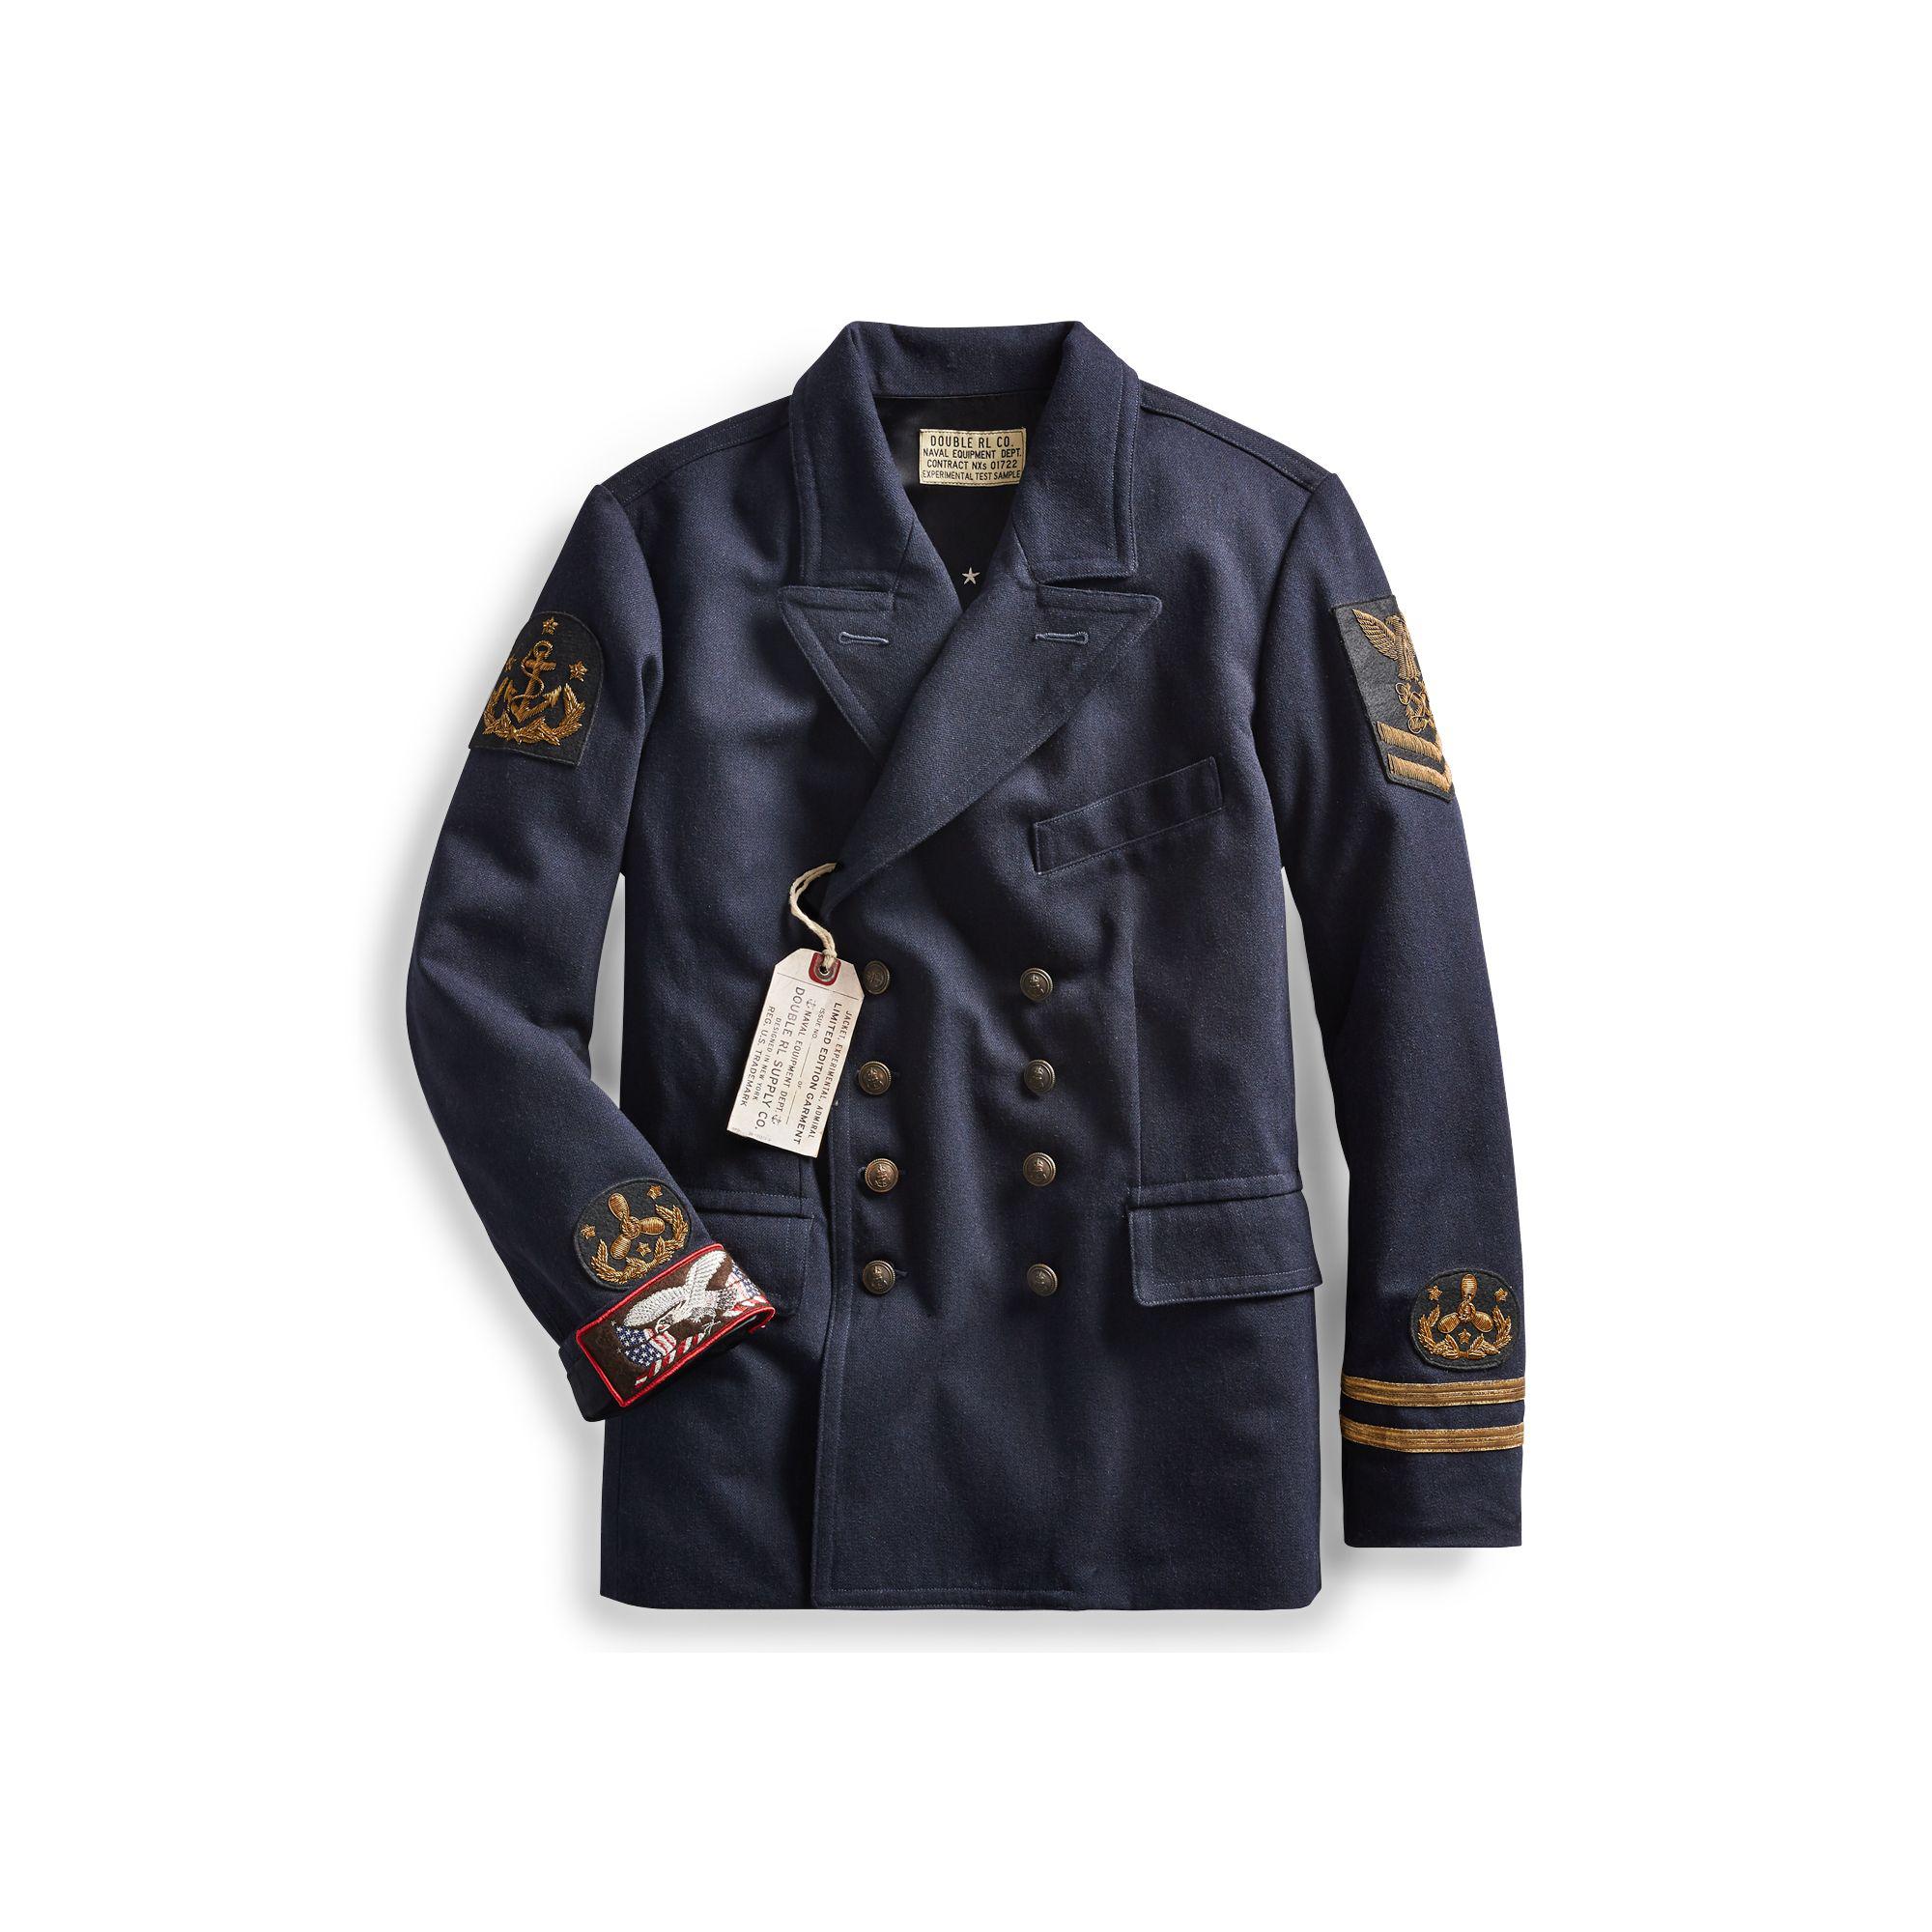 RRL Wool Limited Edition Admiral Jacket in Navy (Blue) for Men - Lyst